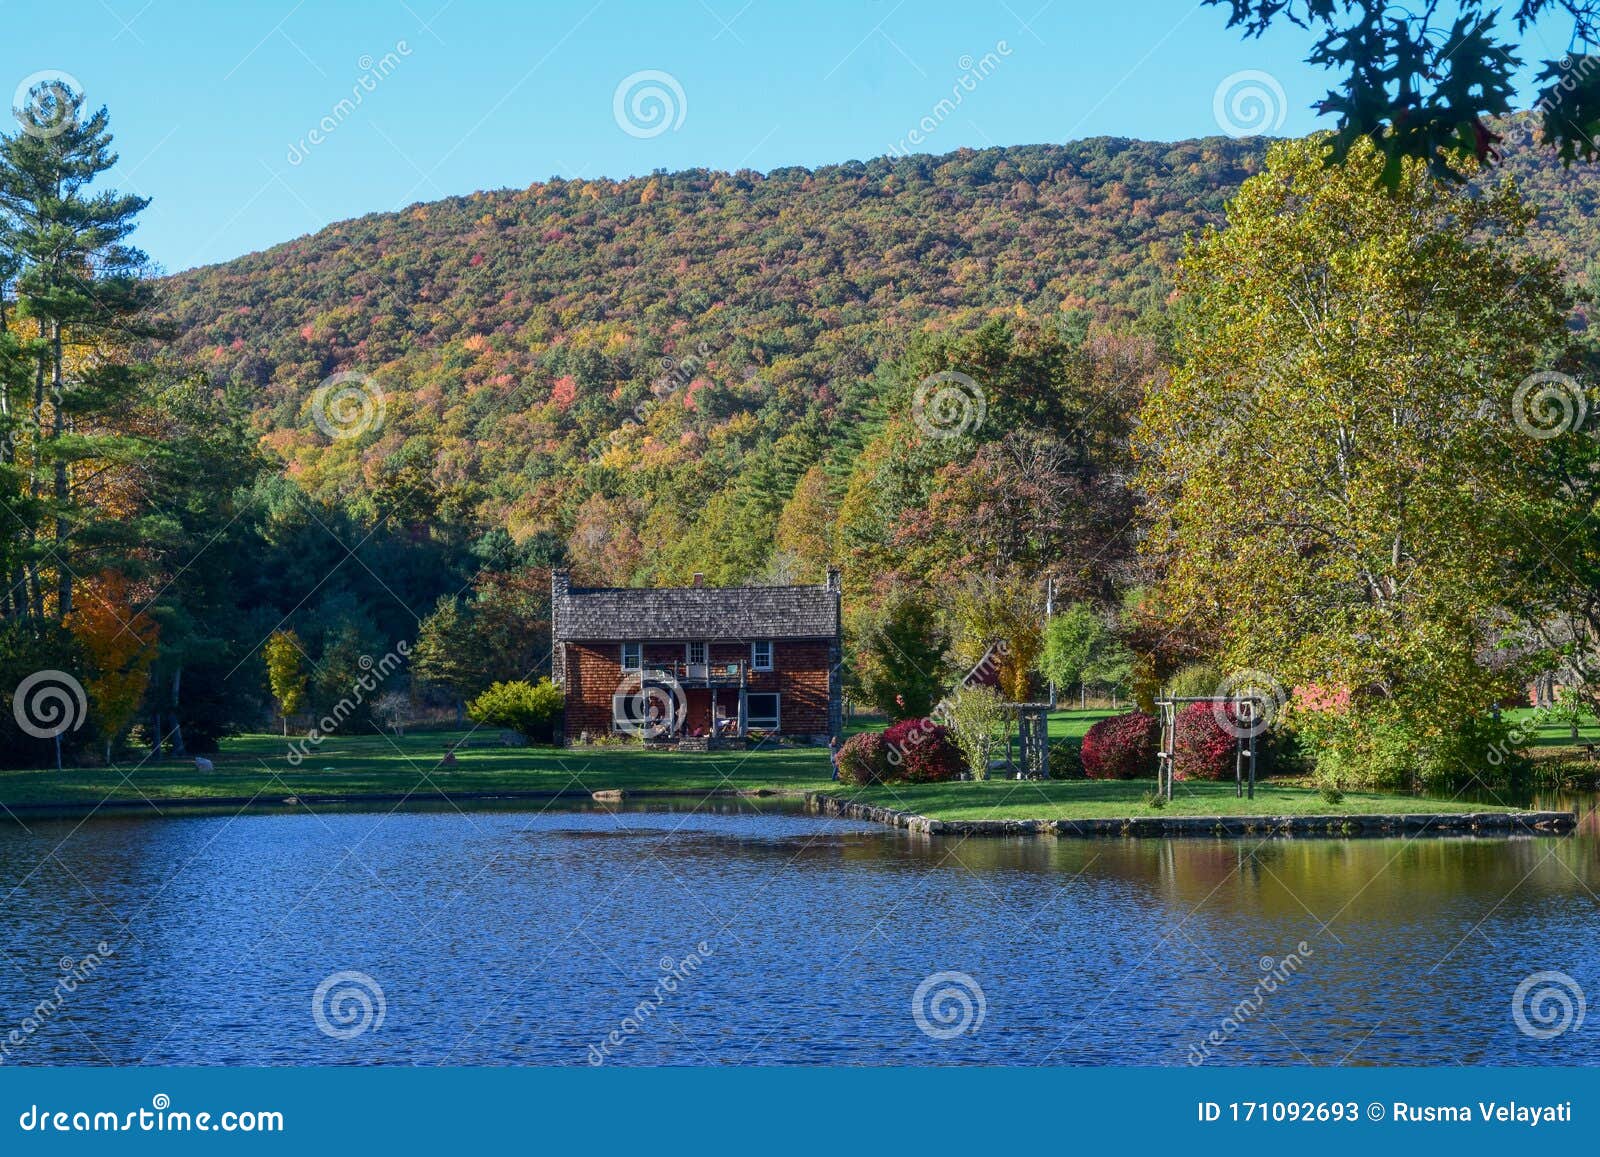 house by the lake at glen alton recreation area in autumn,